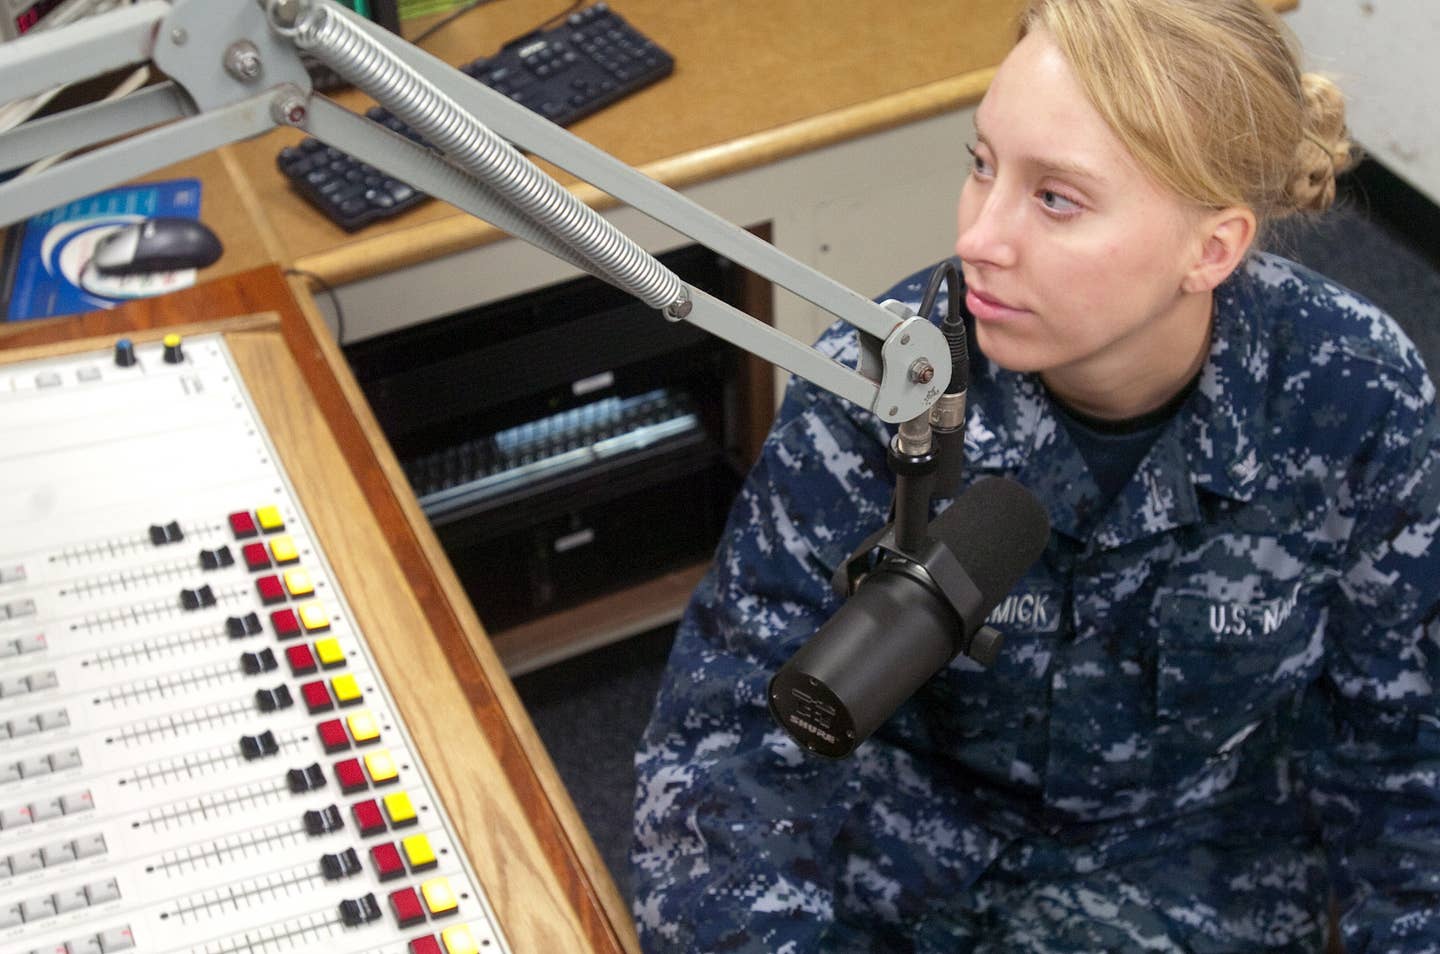 Radio GTMO personality, DJ Stacks, Petty Officer 3rd Class Heidi McCormick, pieces together her classic rock radio program, Jan. 10. McCormick is one of four DJs at the station who put together a total 21 local shows for the Guantanamo Bay community.